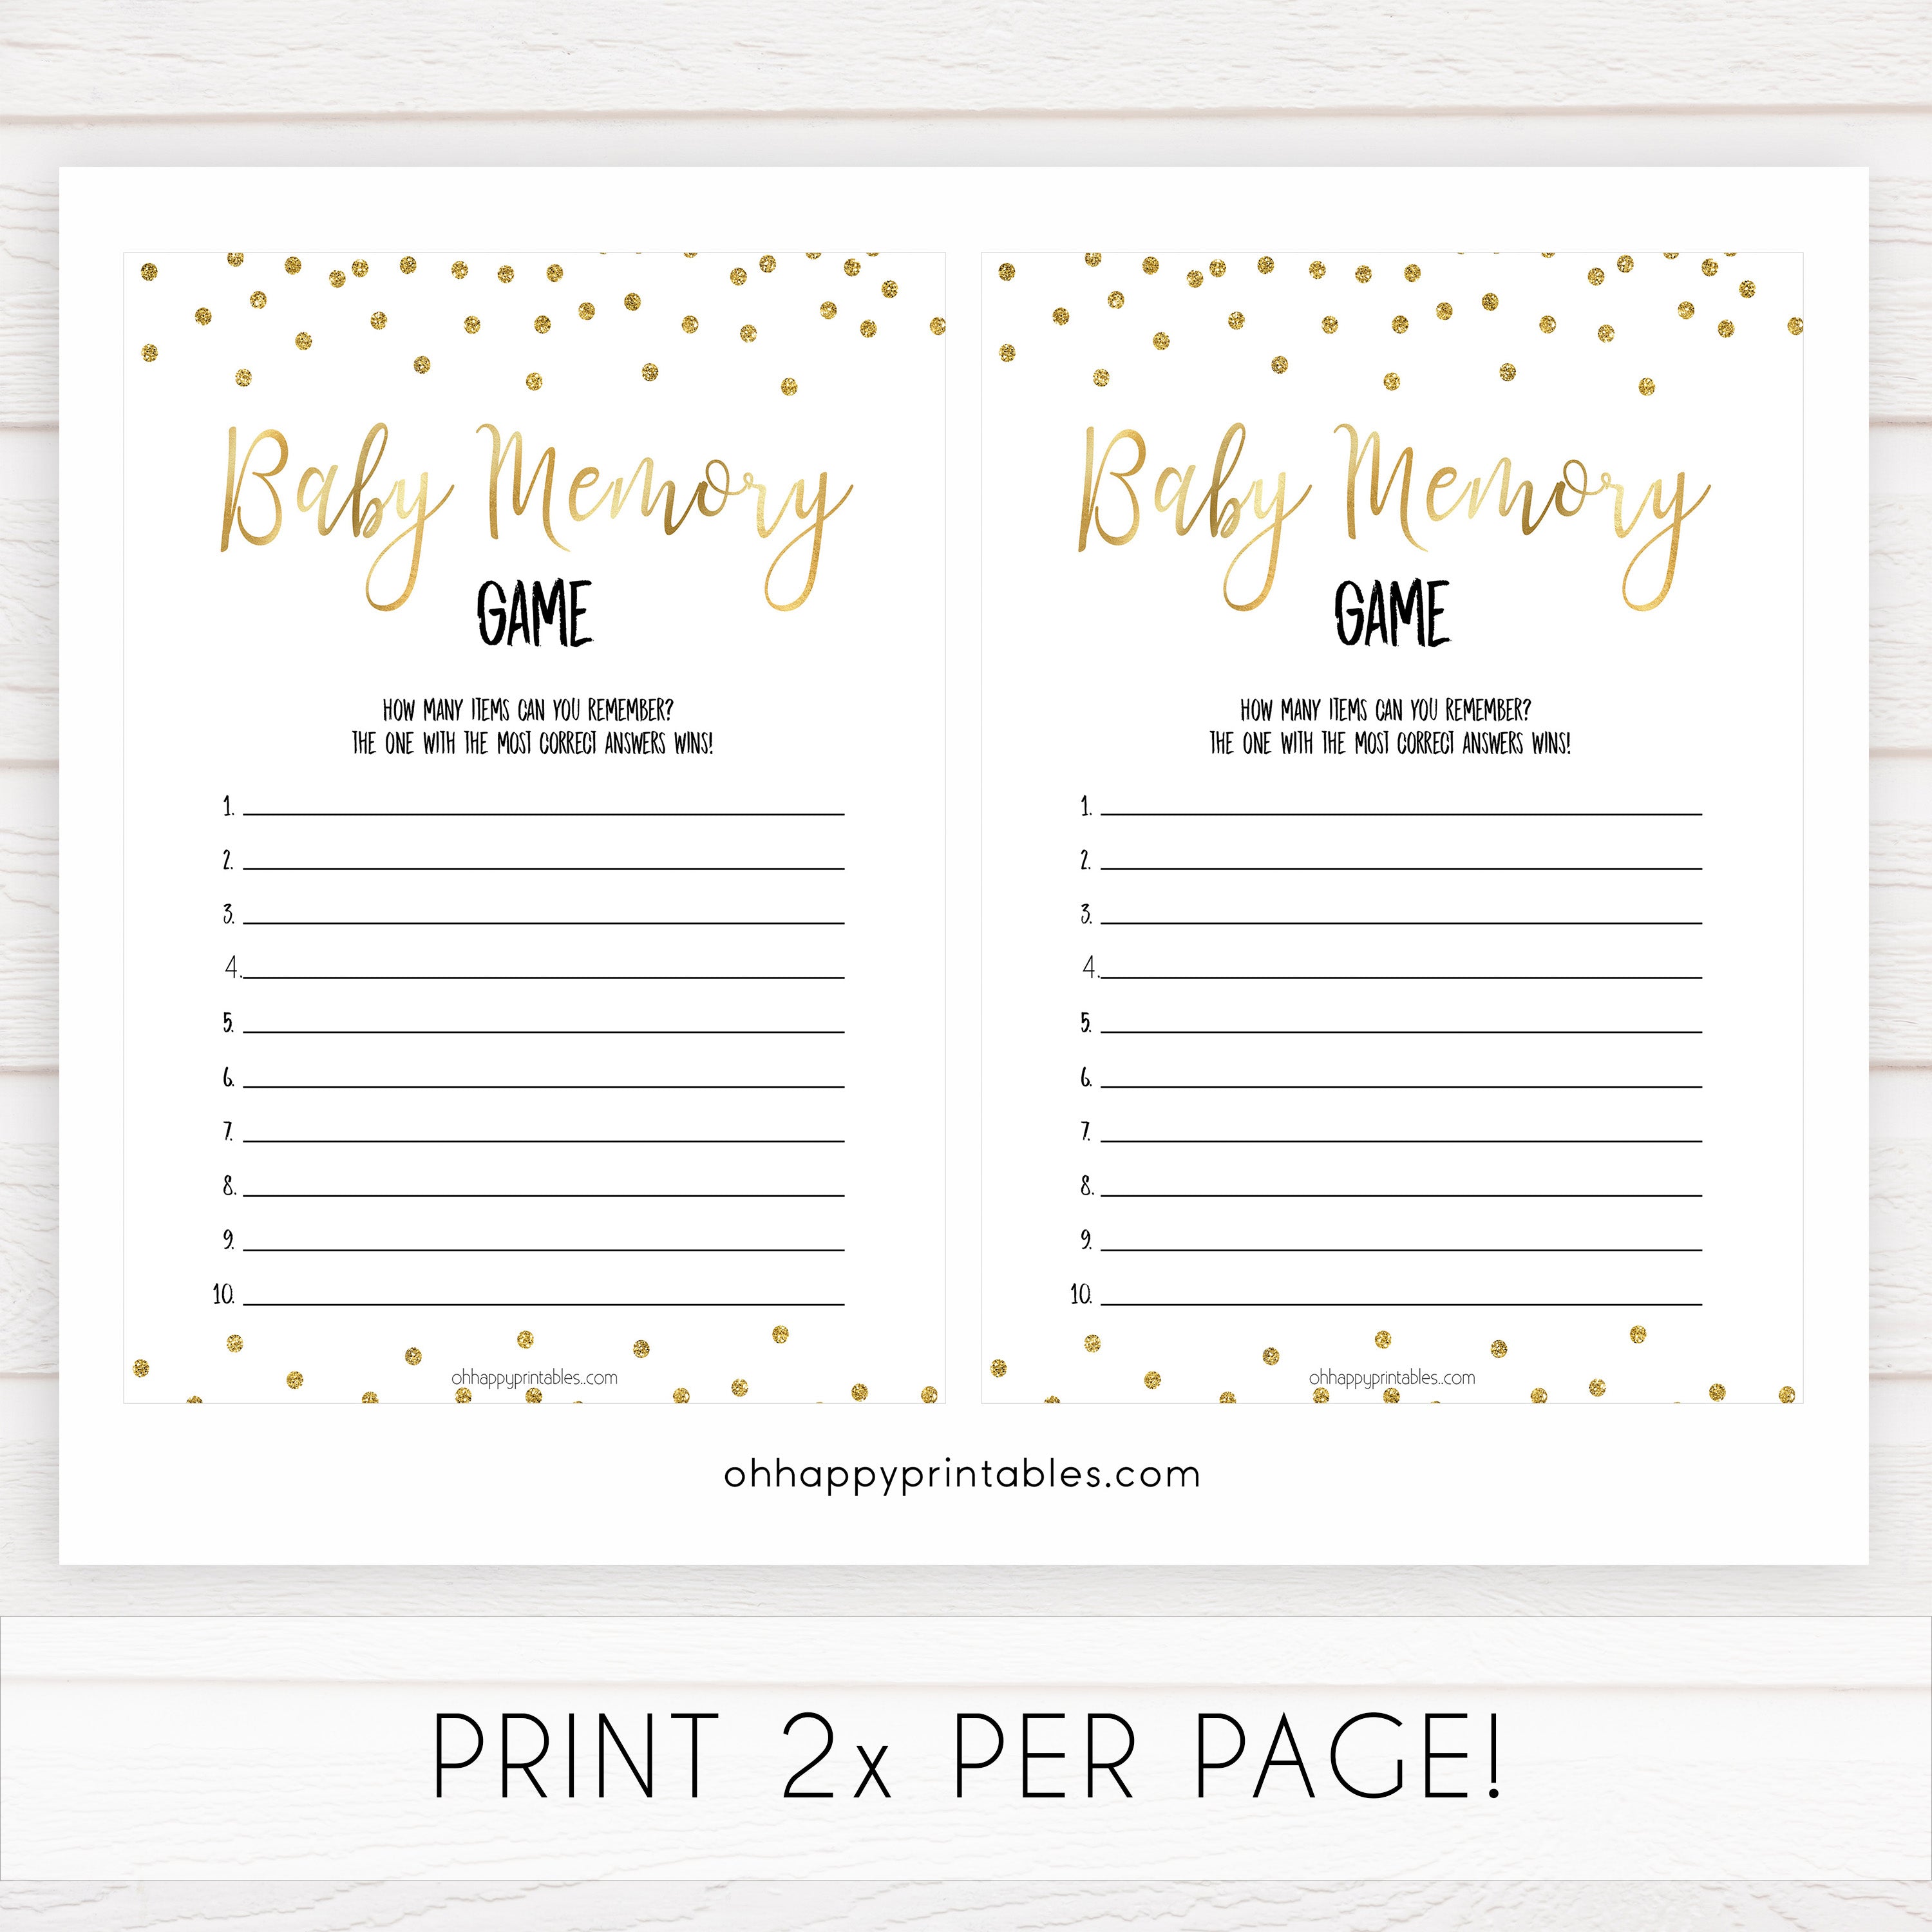 gold baby shower games, baby memory games, printable baby games, fun baby games, popular baby games, baby shower games, gold baby games